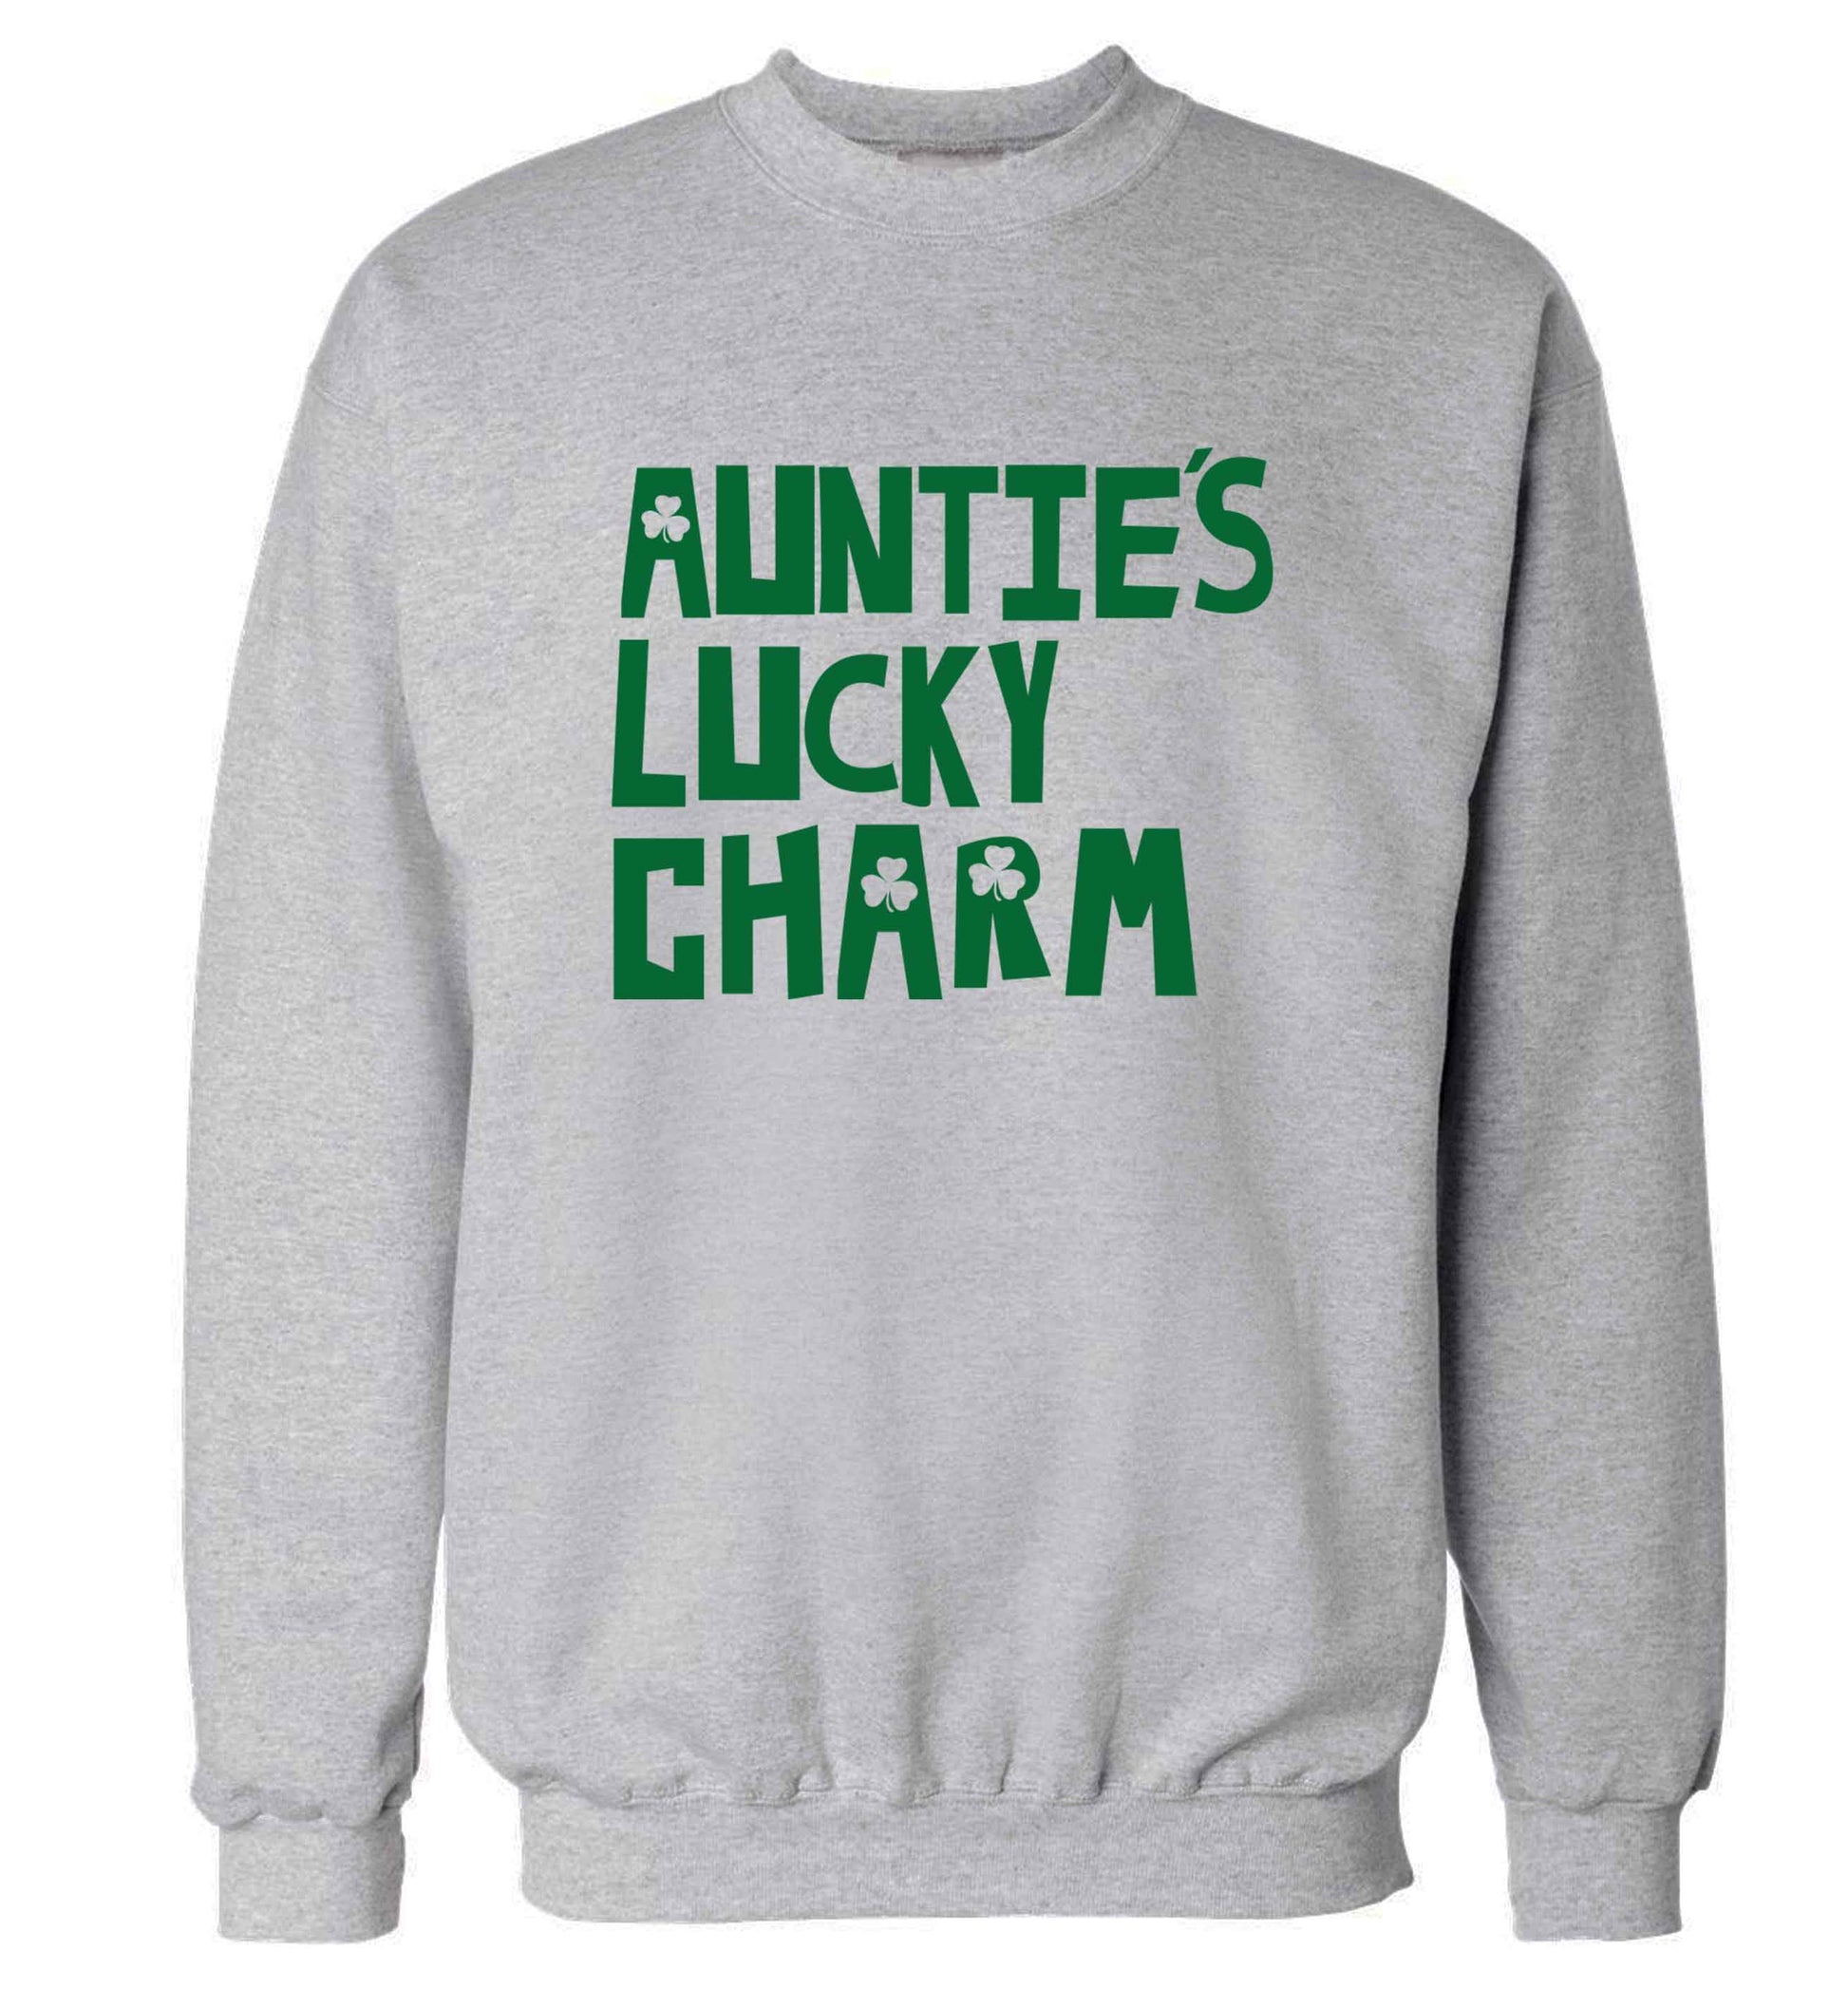 Auntie's lucky charm adult's unisex grey sweater 2XL